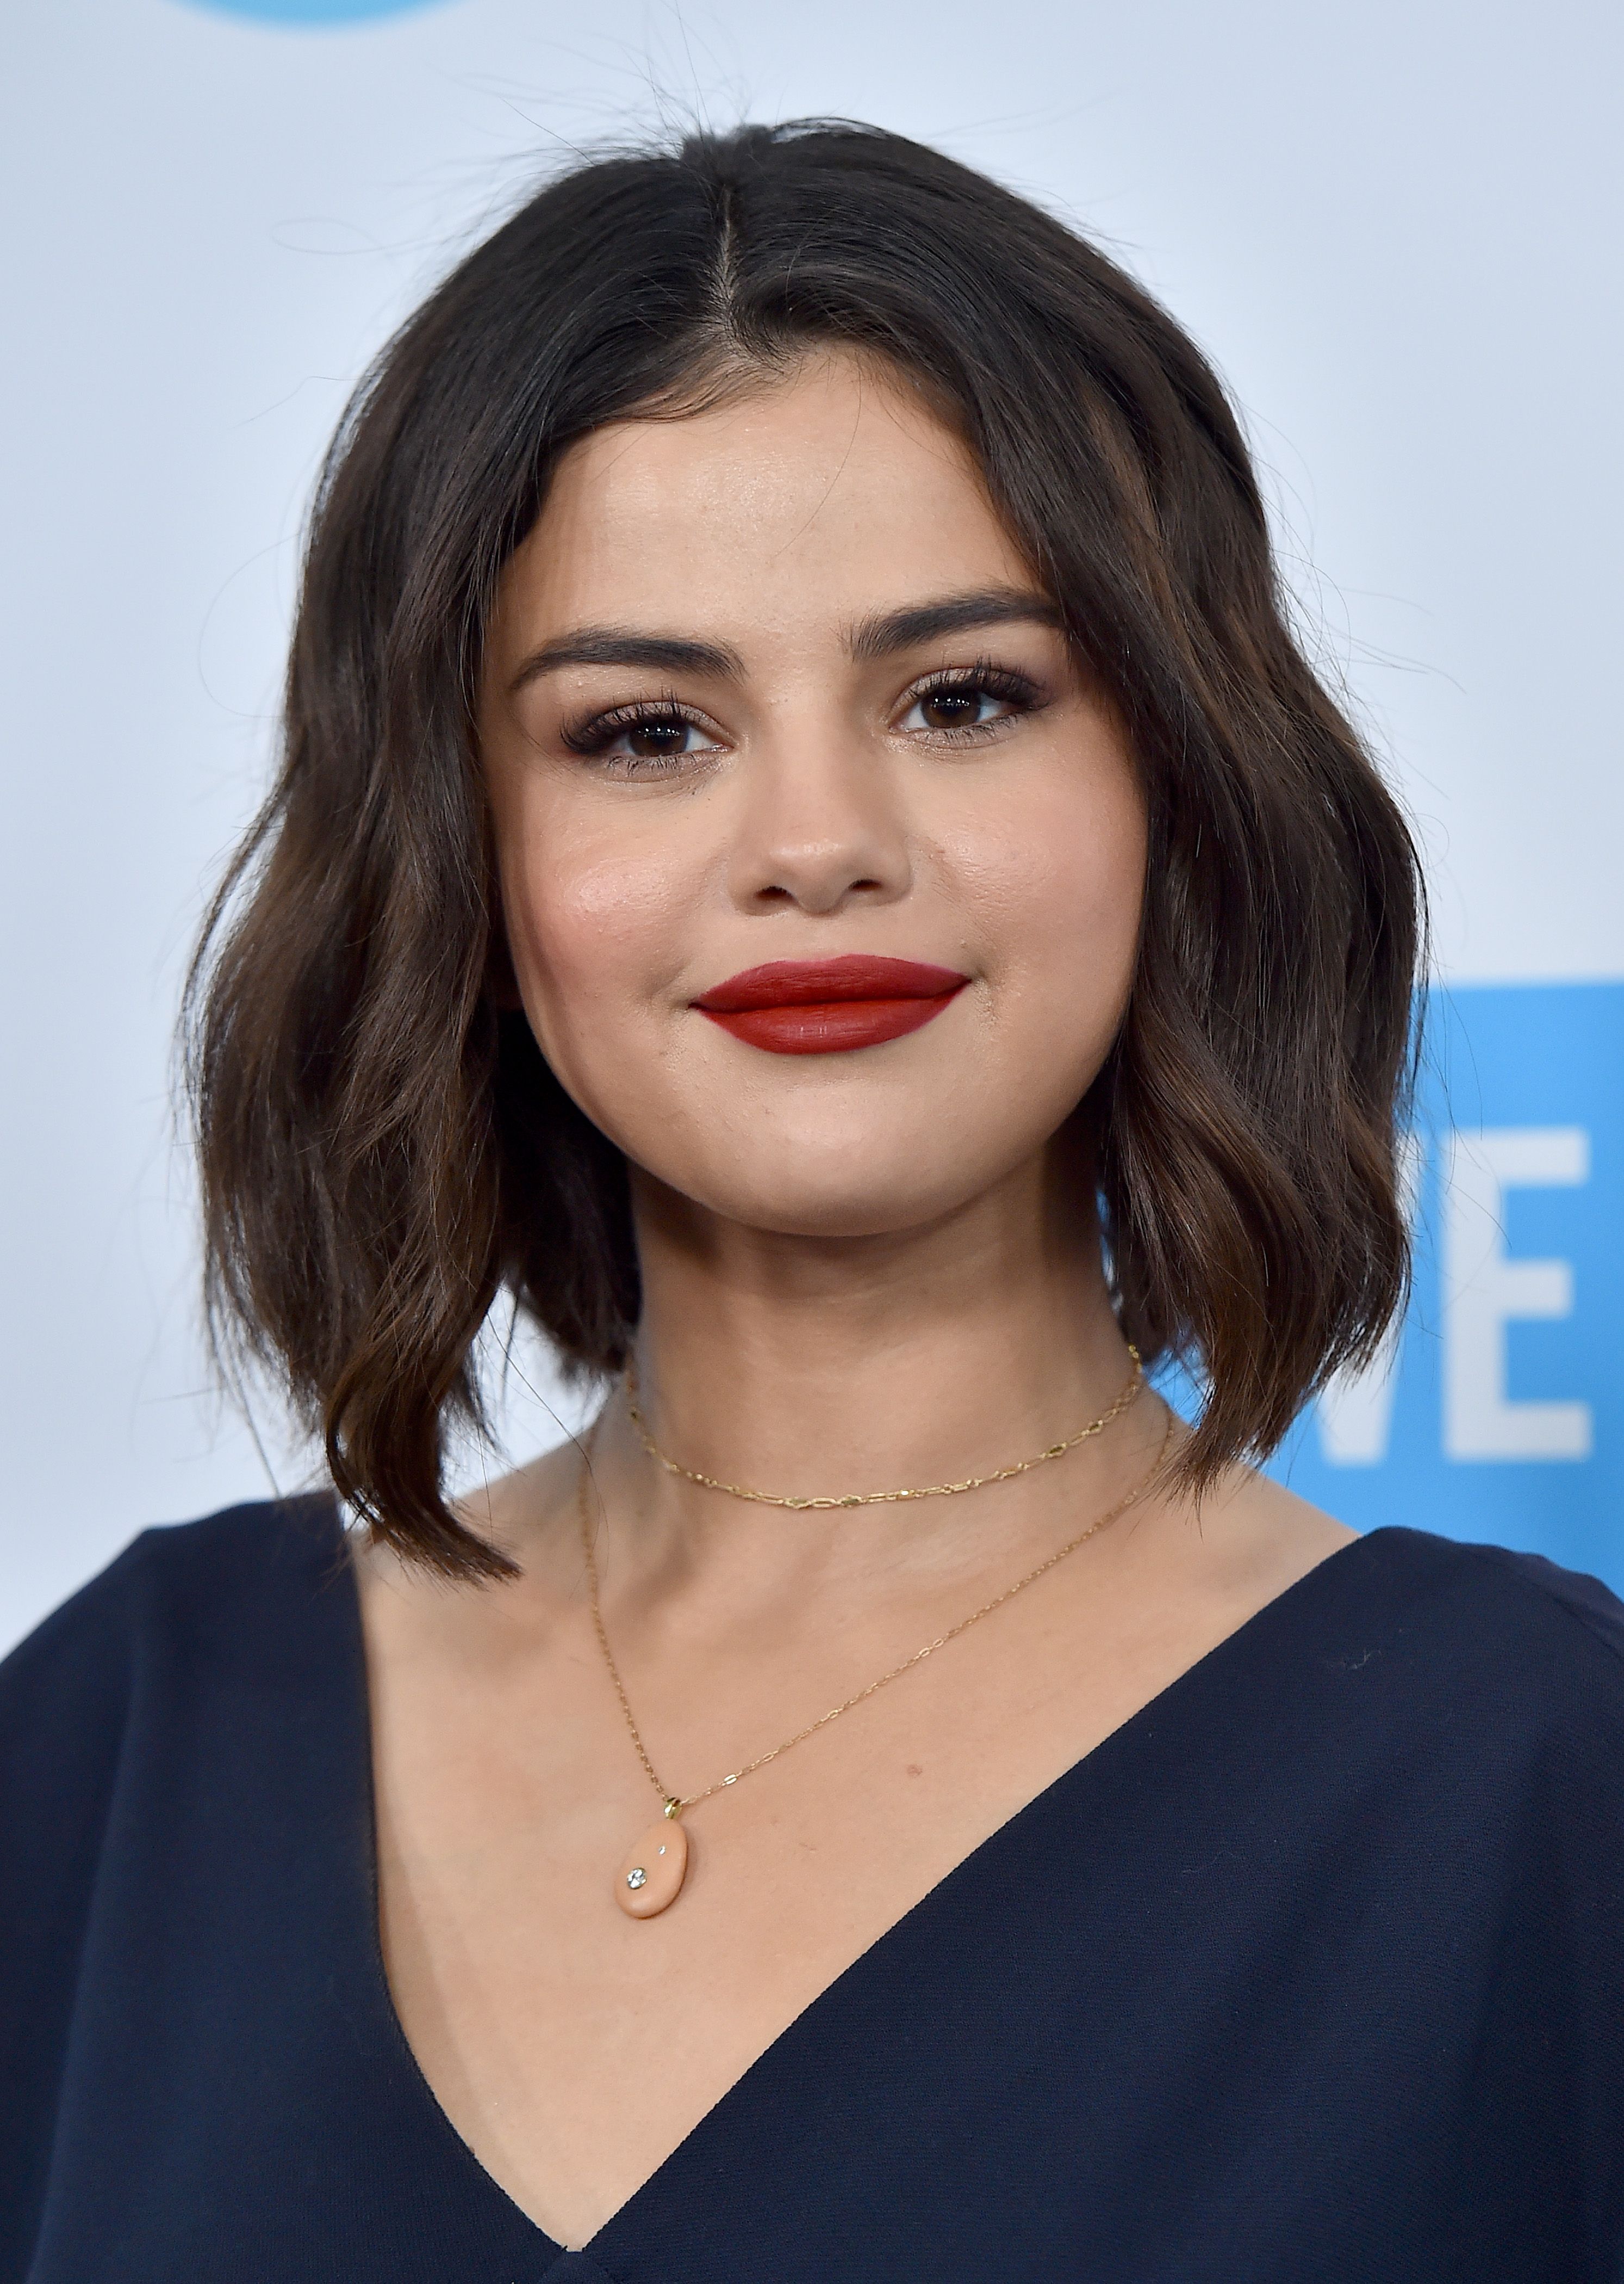 Selena Gomez cuts her hair into a lob — see her new look!